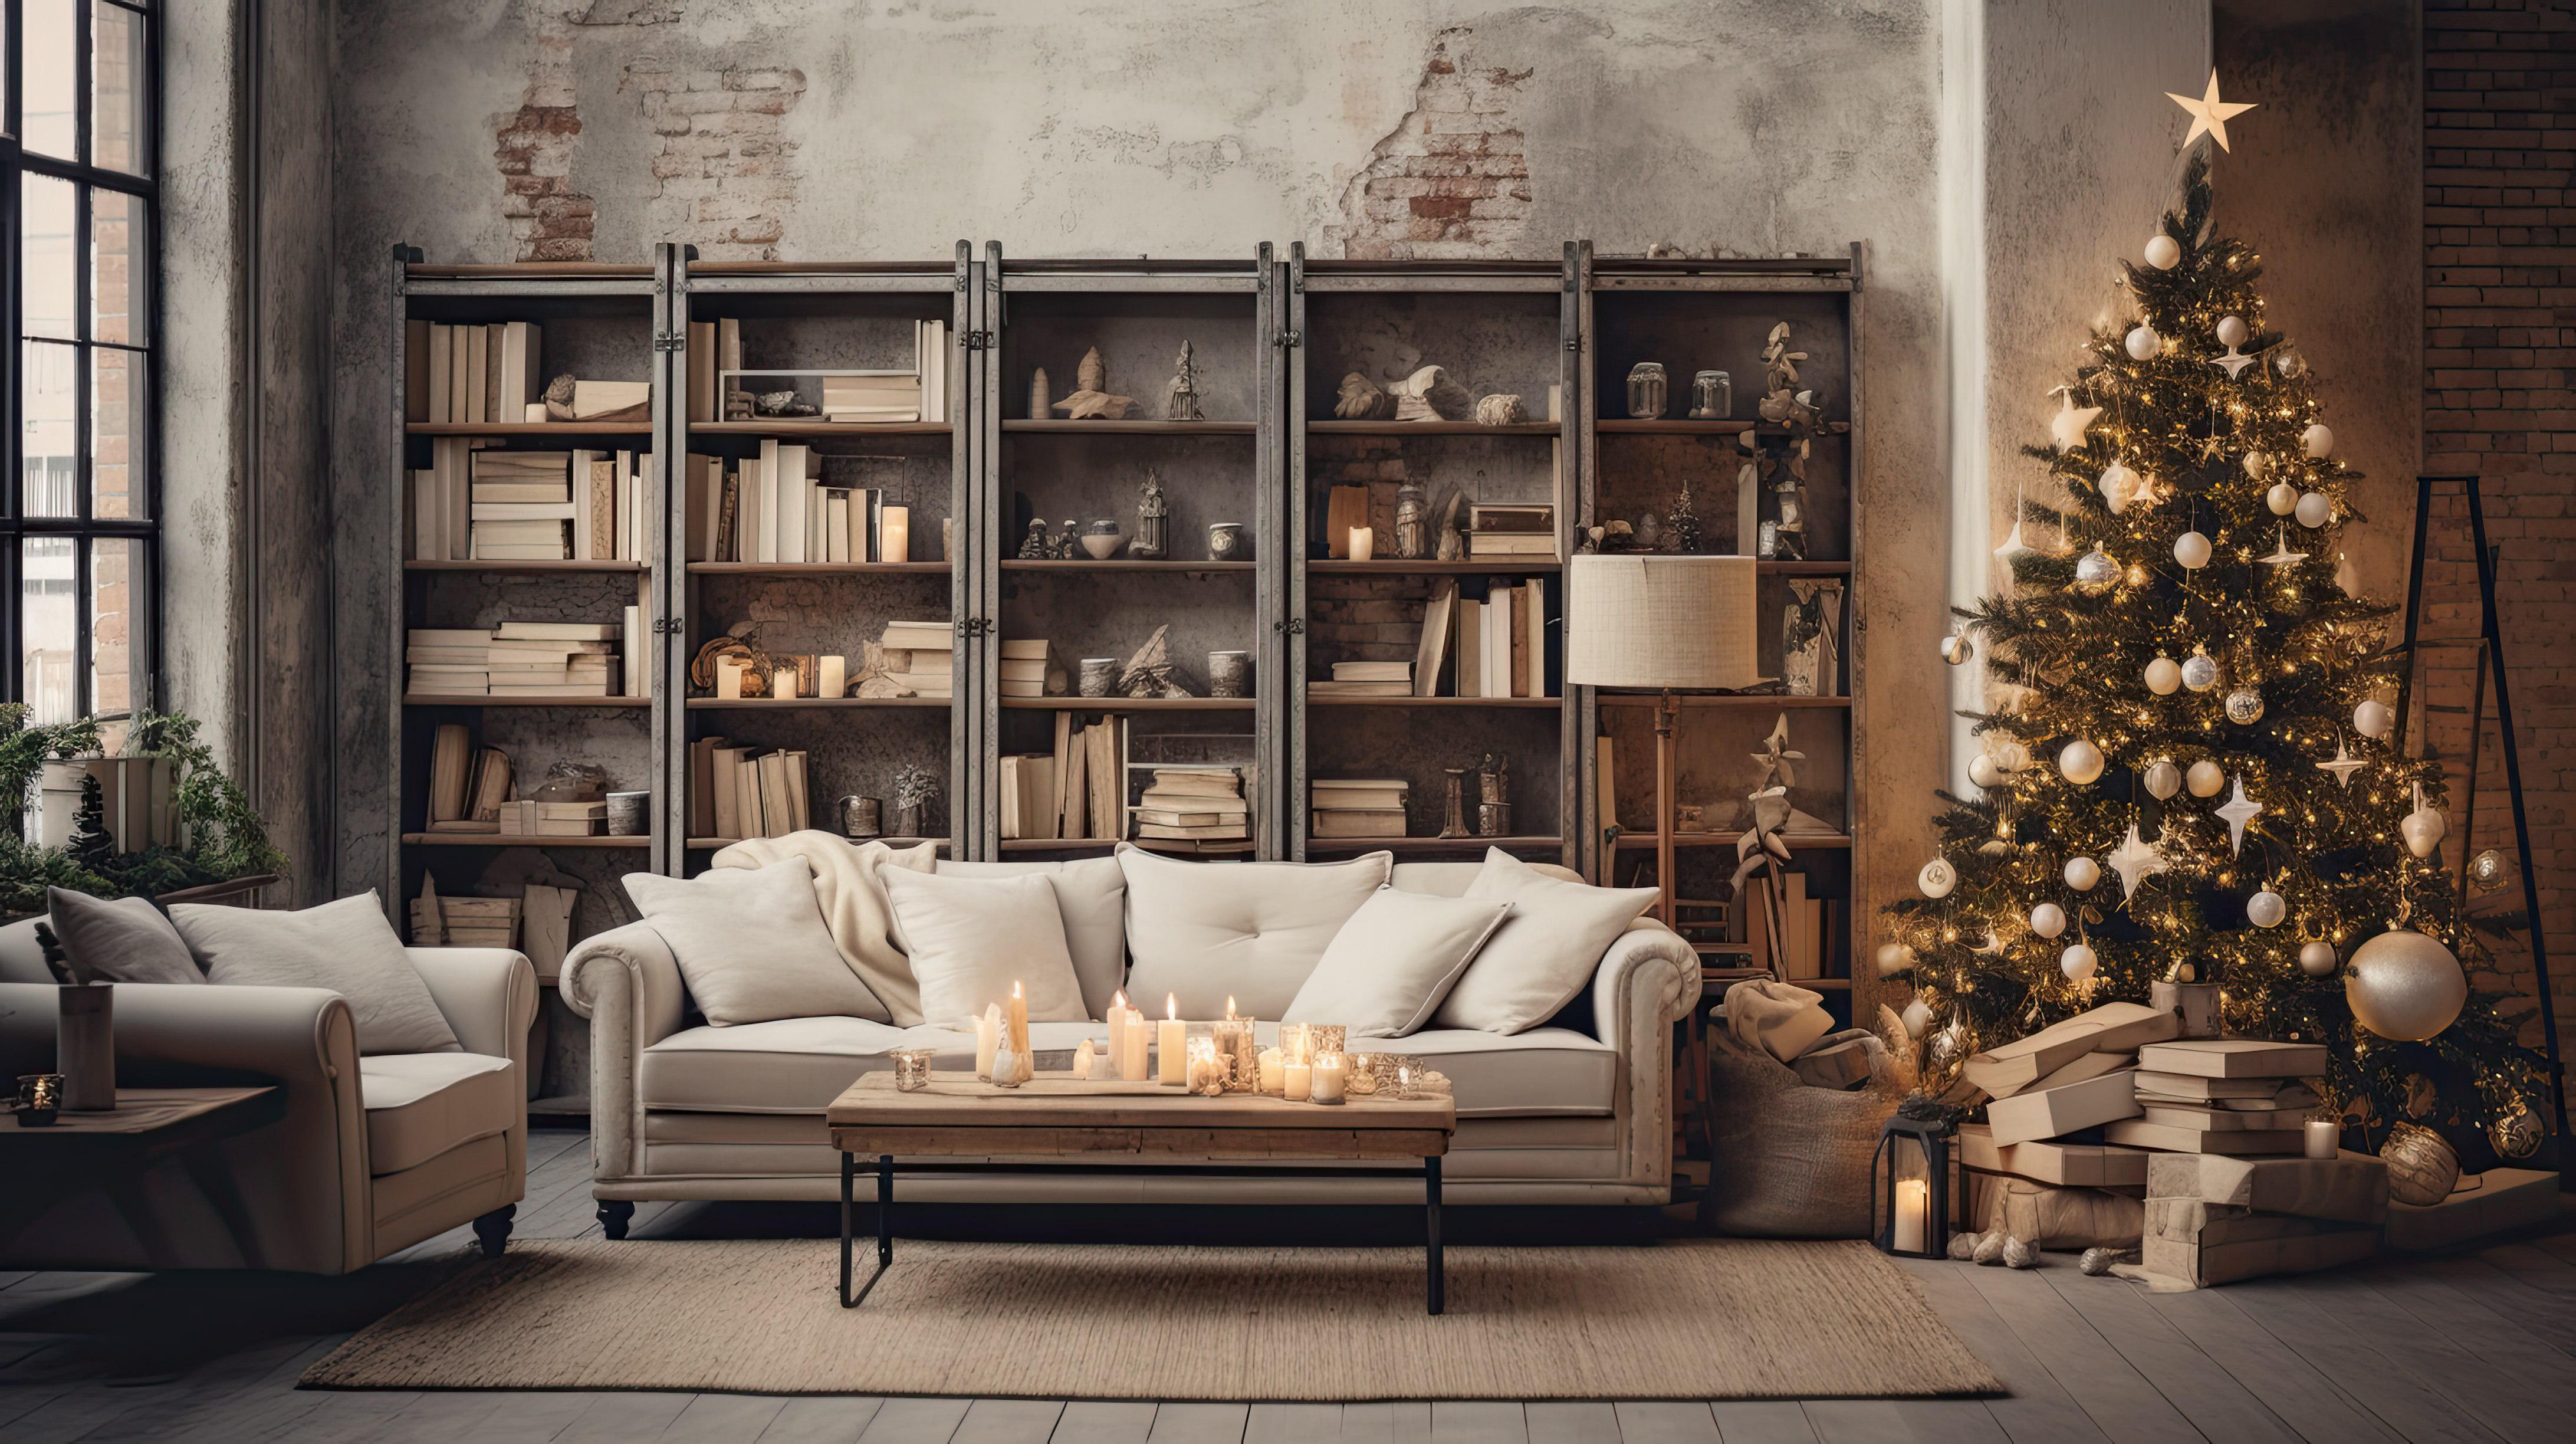 Deck the Halls A Guide to Holiday Home Decorating with Ivory Homes